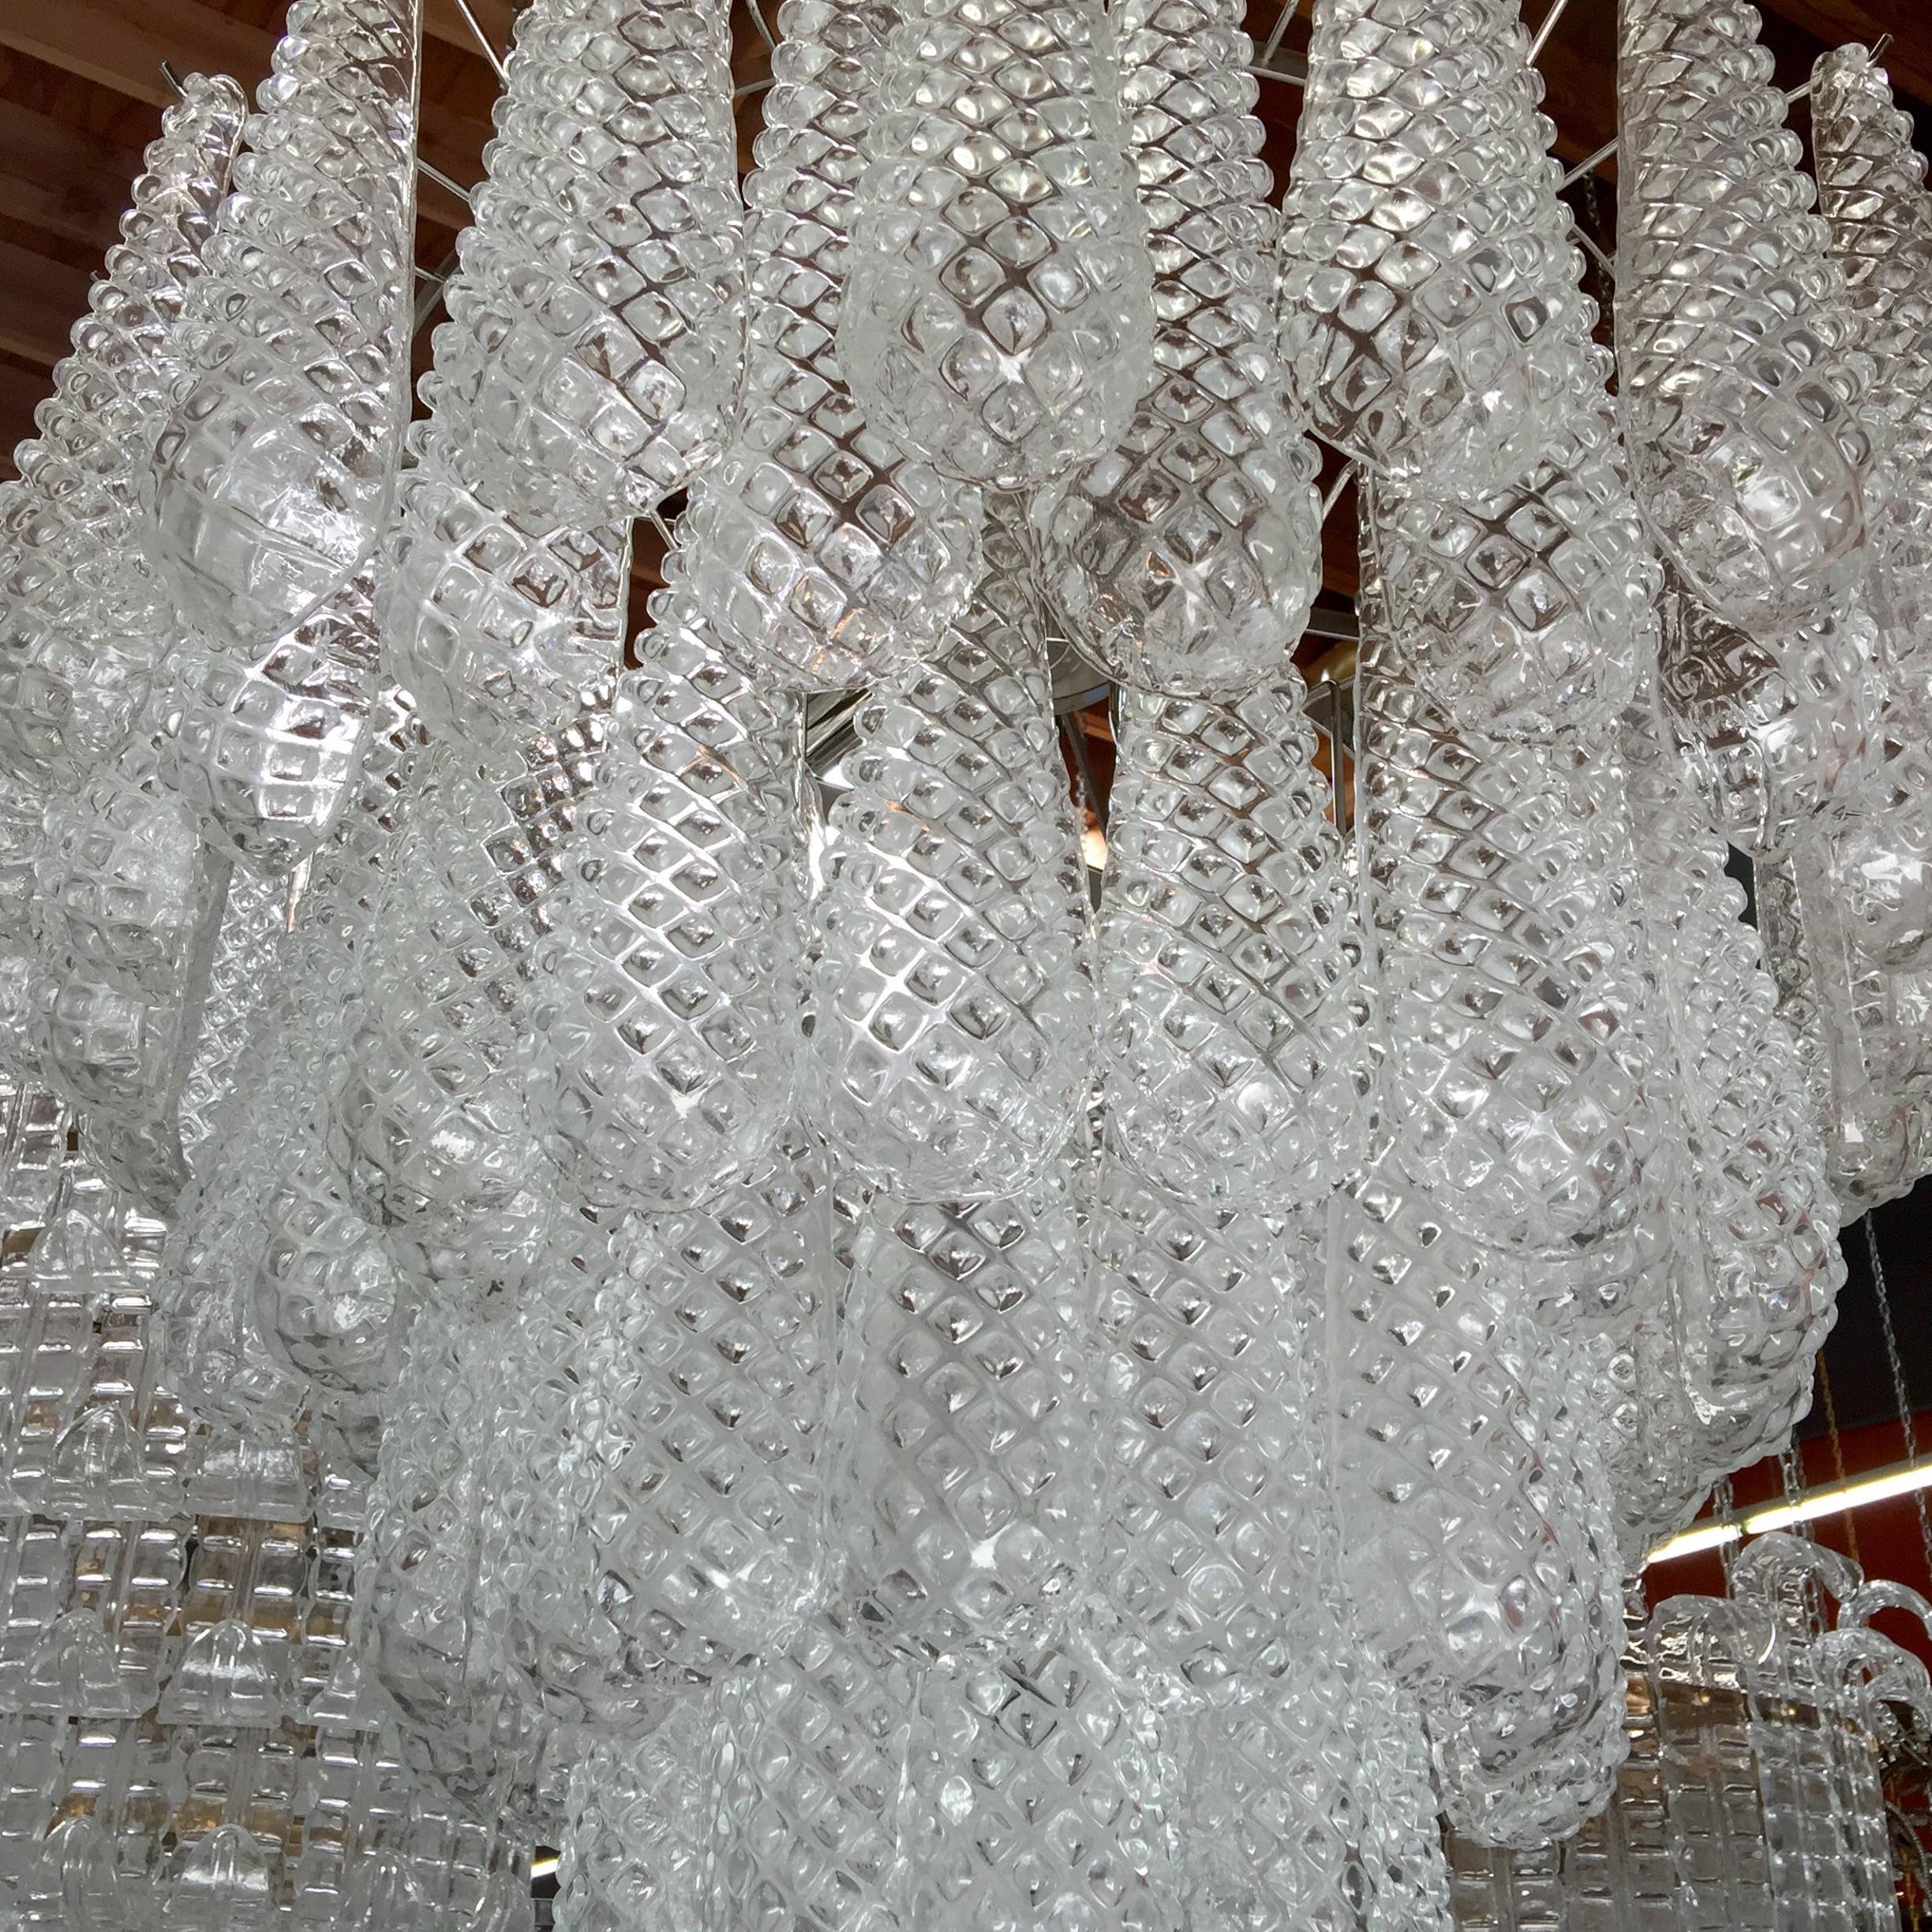 Etched Tears Chandelier by Fabio Ltd In New Condition For Sale In Los Angeles, CA